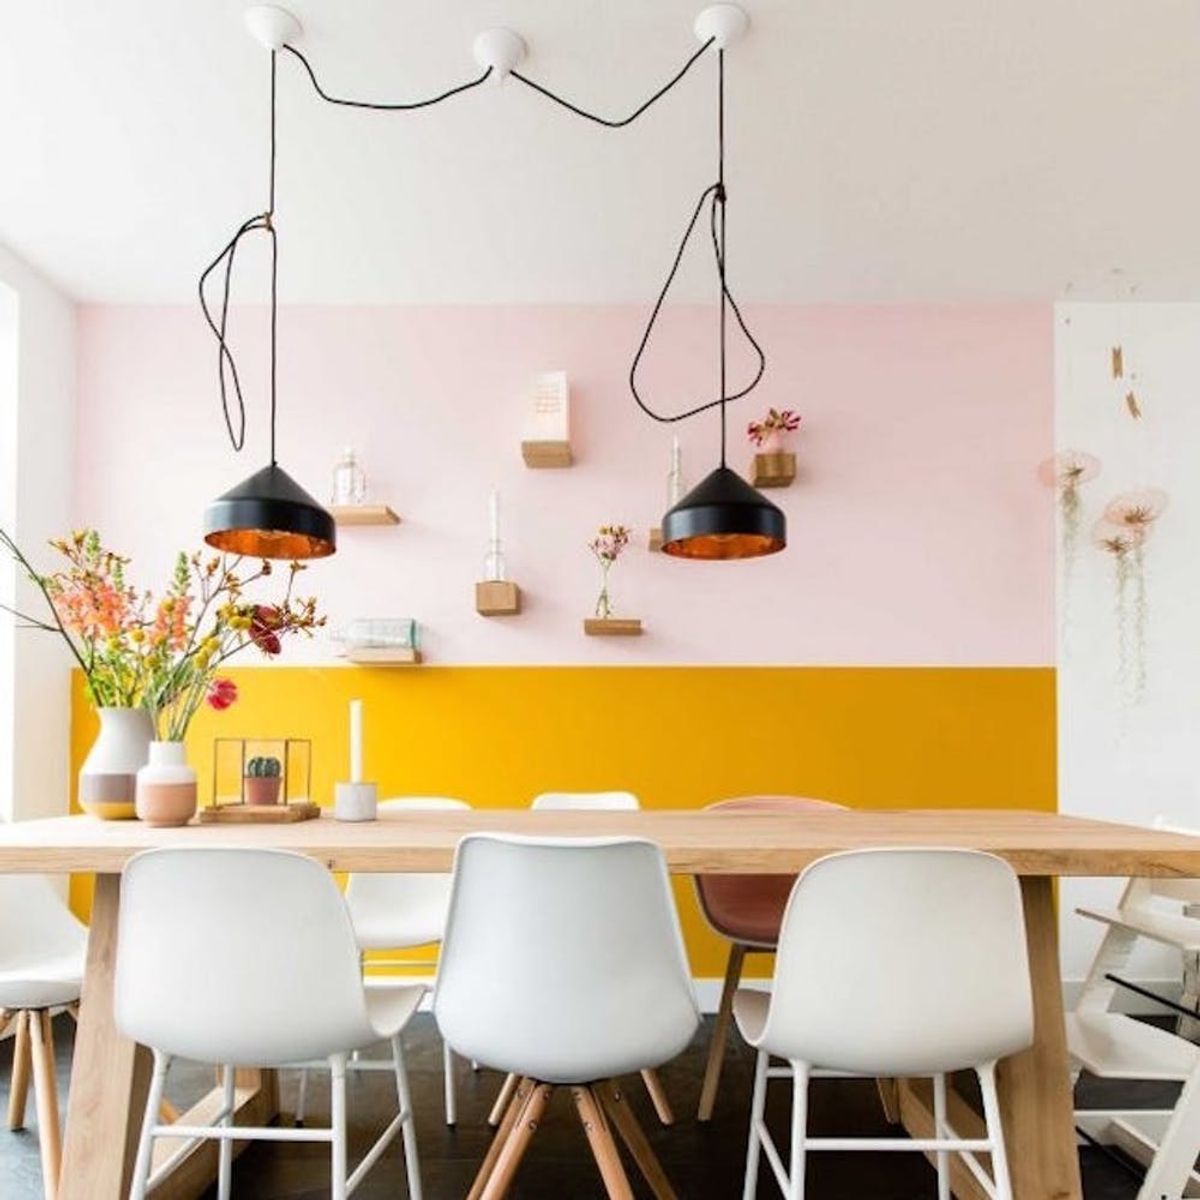 18 Ways to Decorate With the New Ochre Color Trend